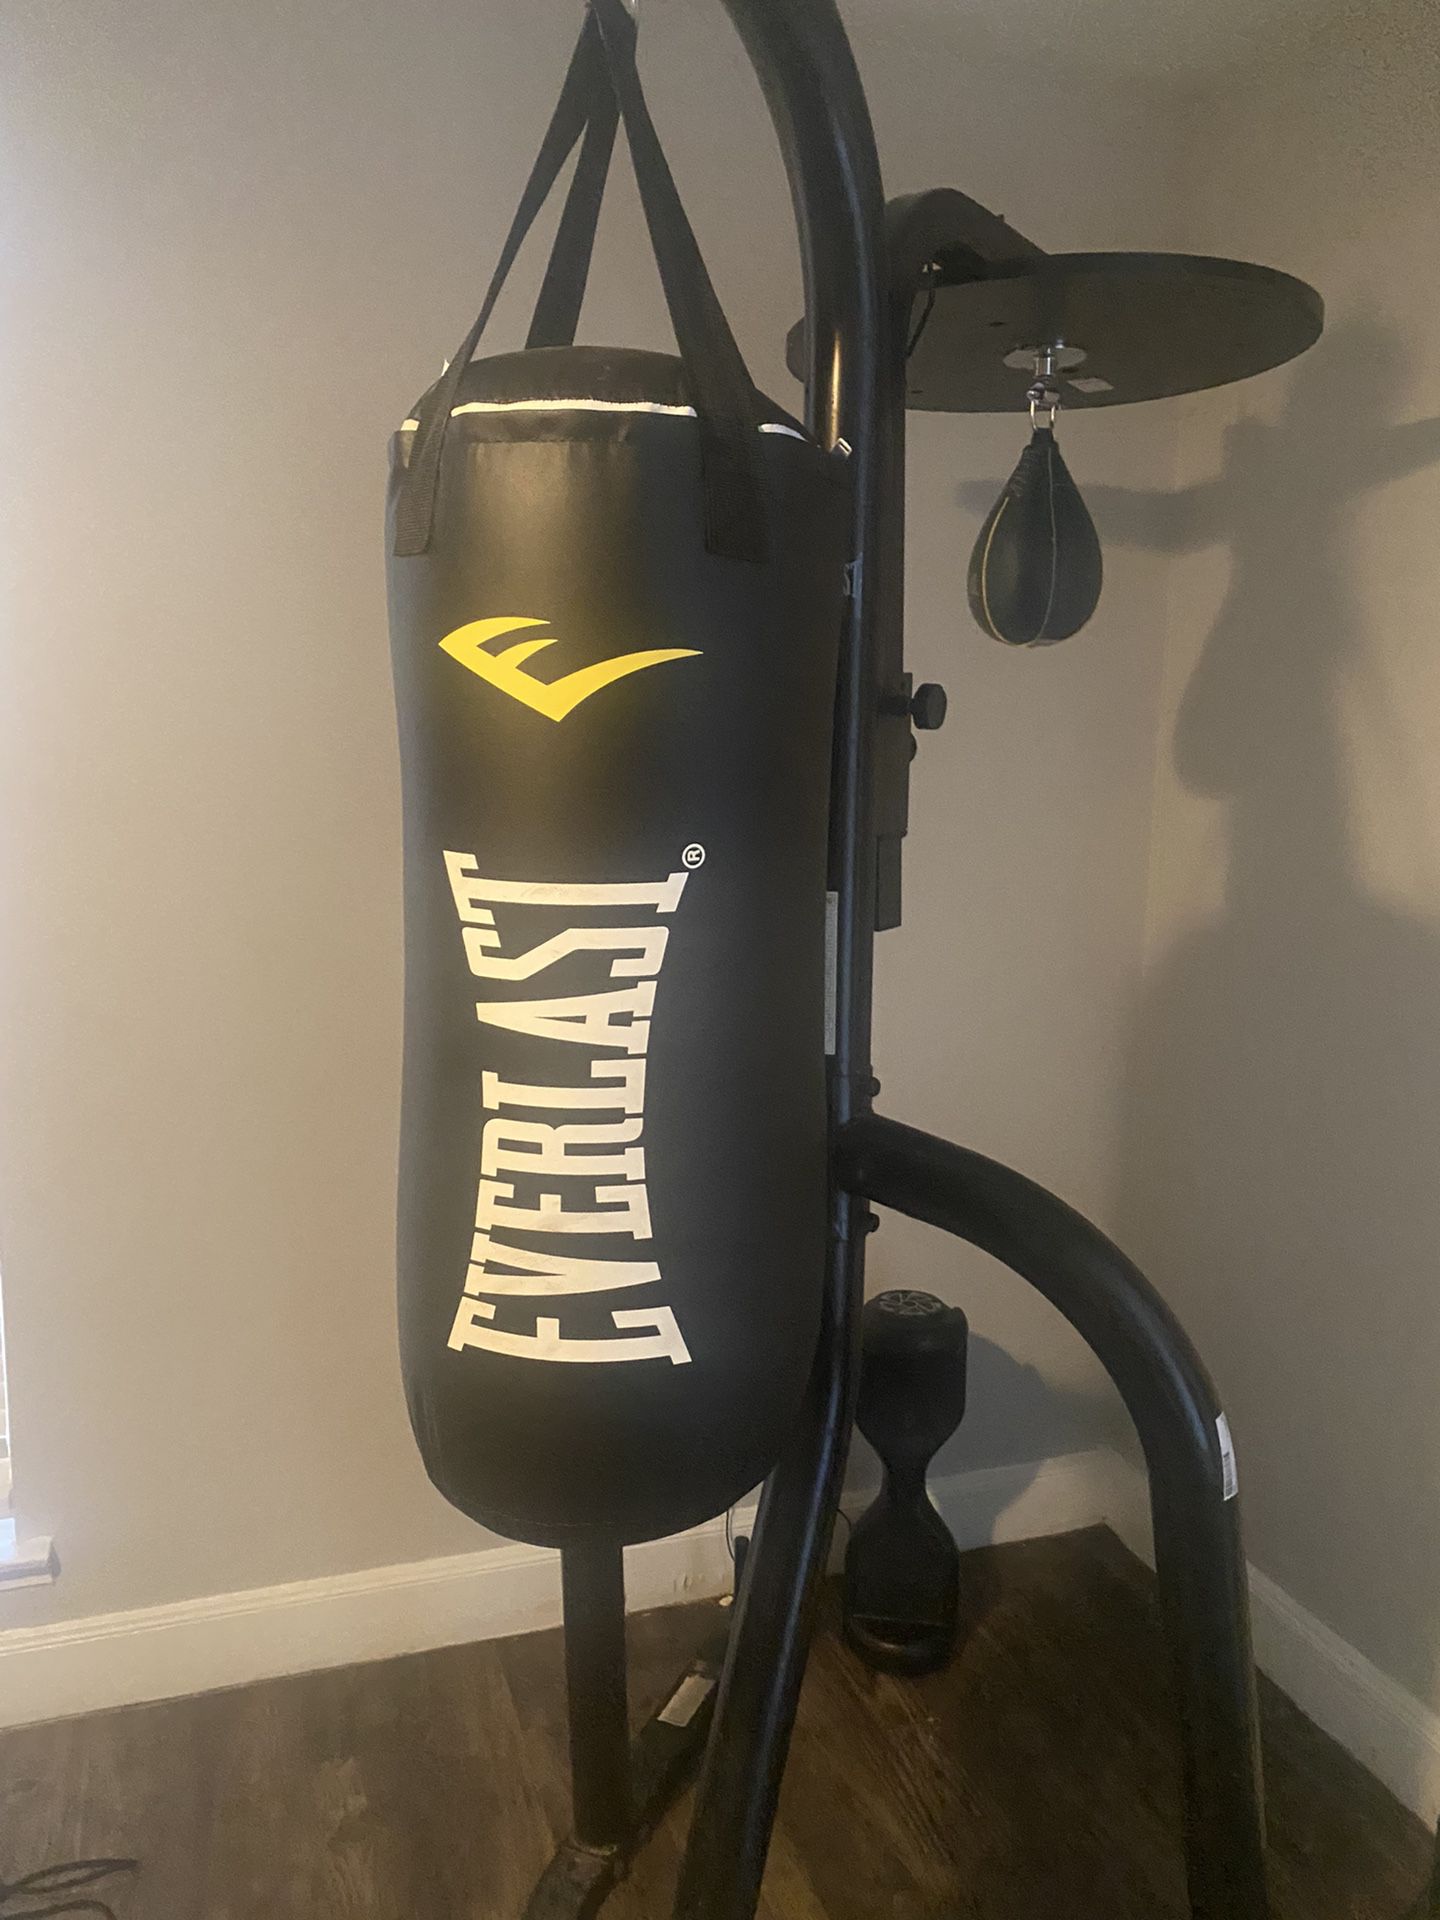 everlast punching bag , everlast speed bag with stand and everlast reflex bag